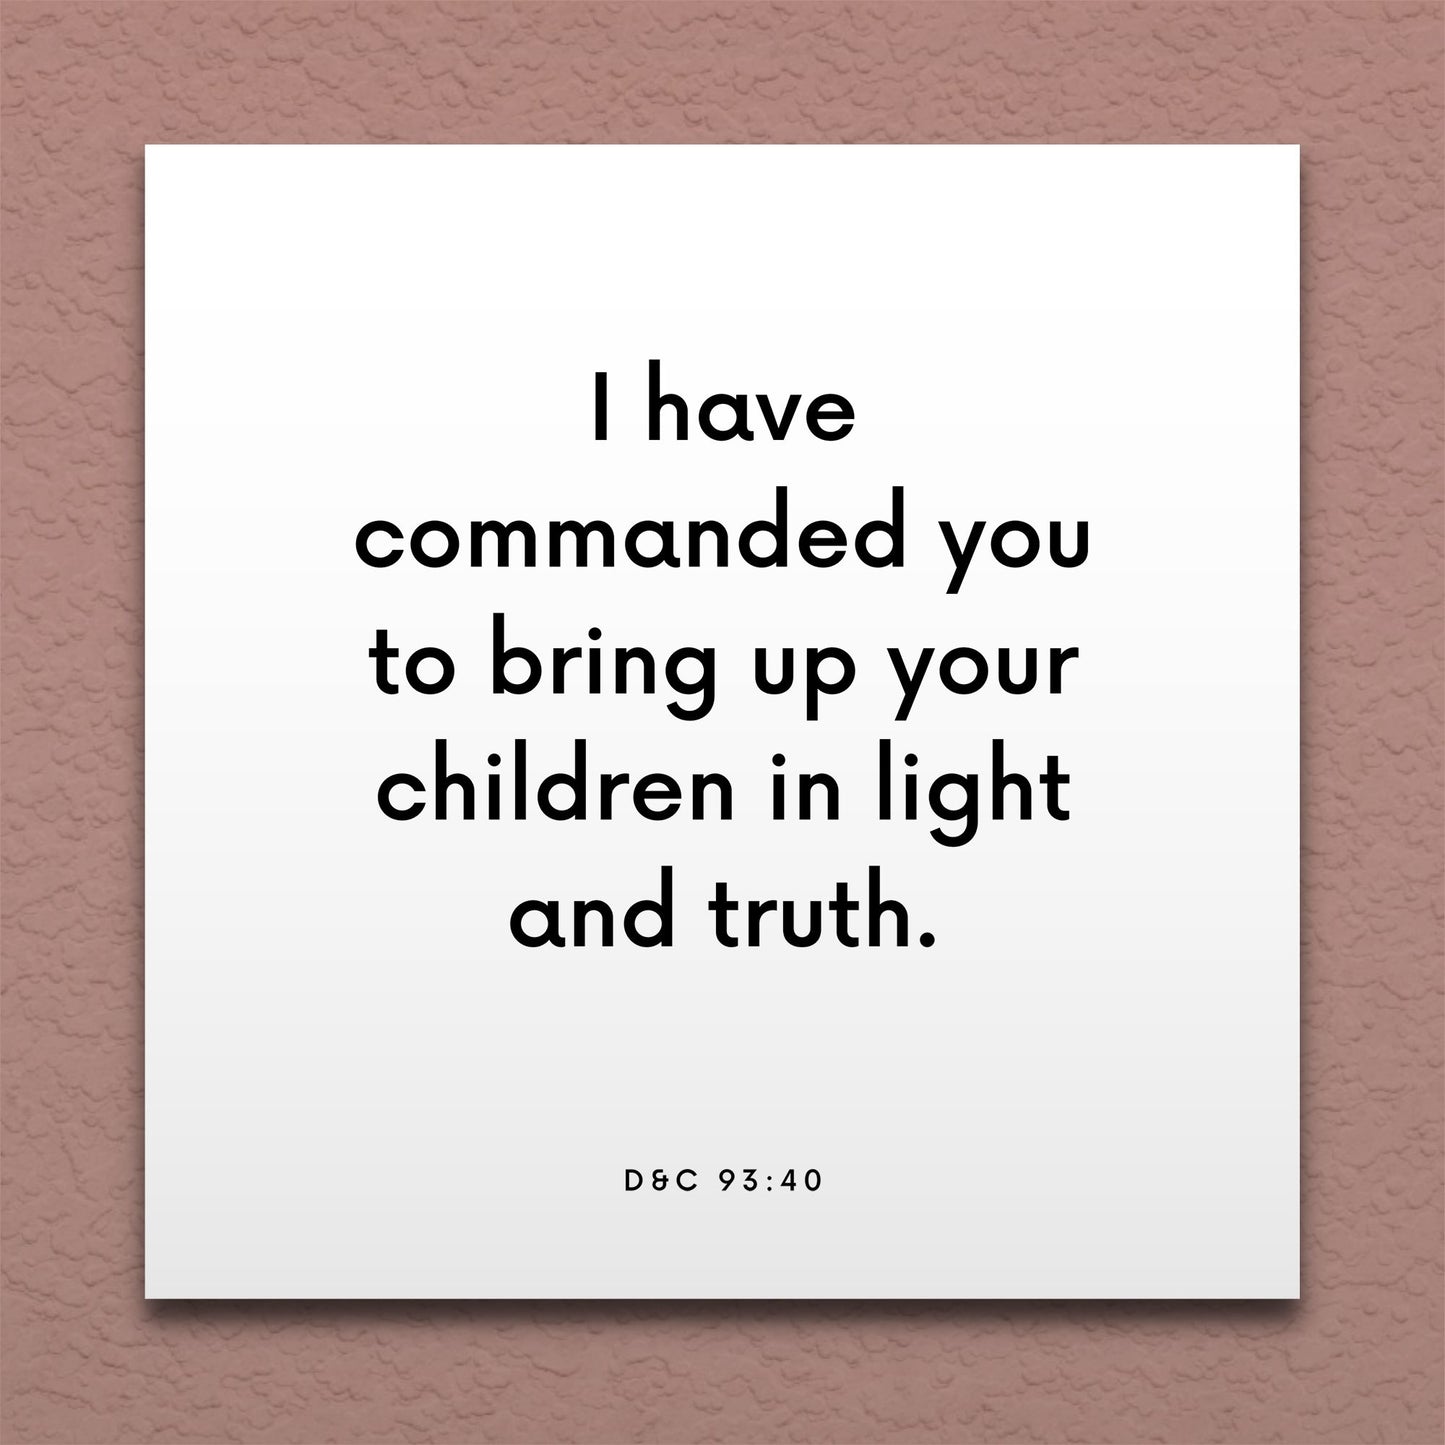 Wall-mounted scripture tile for D&C 93:40 - "Bring up your children in light and truth"